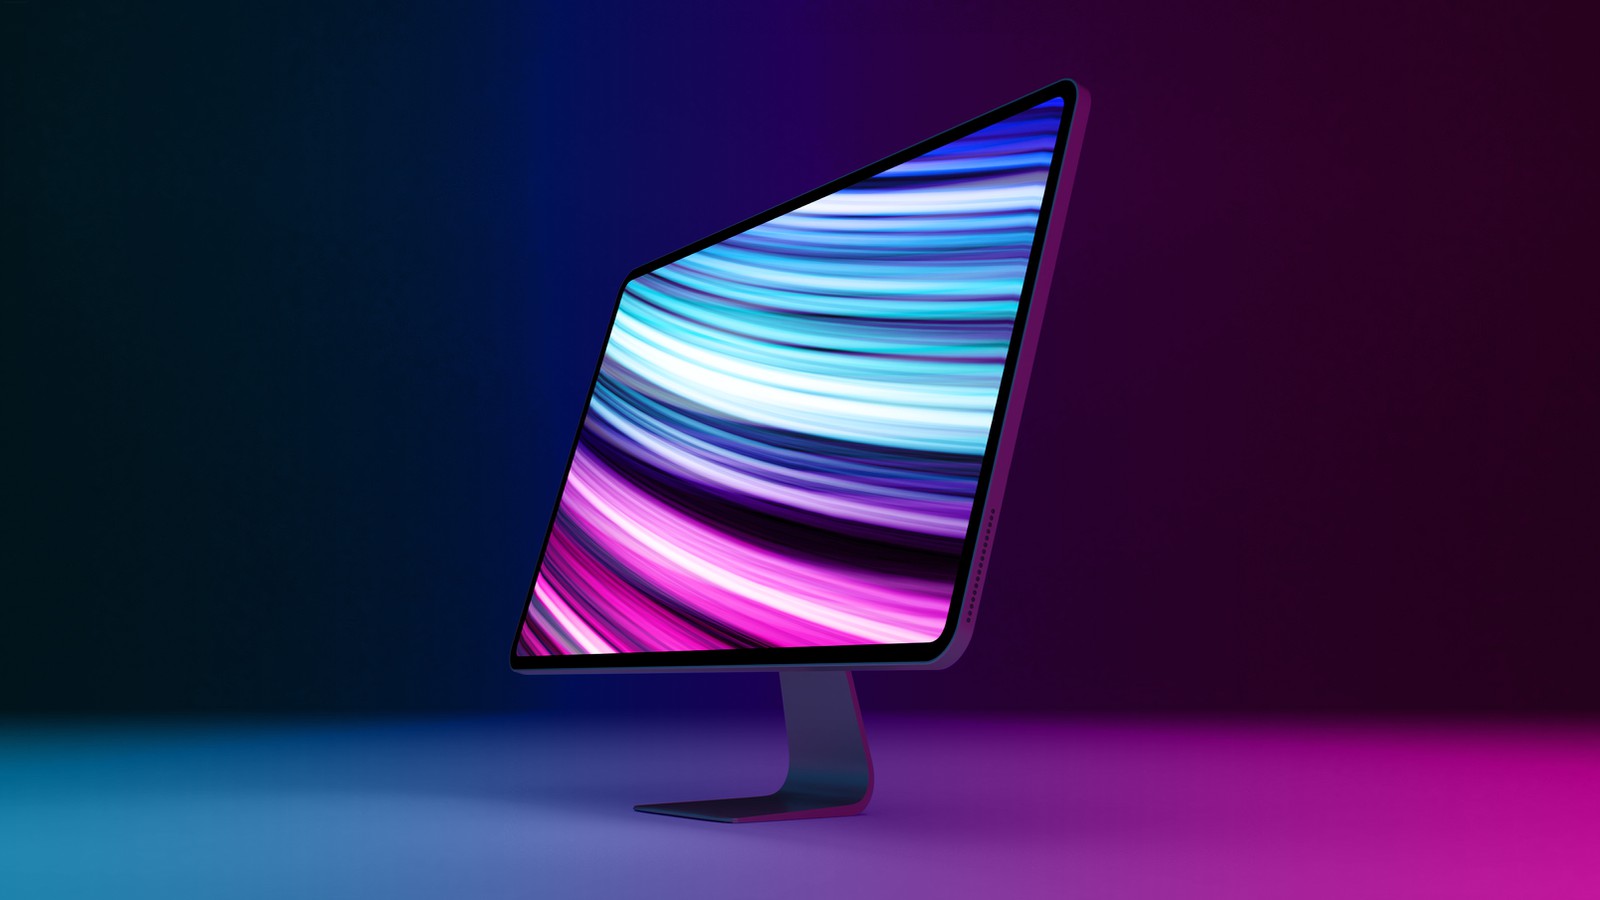 iMac redesign with slimmer bezels expected at WWDC 2020